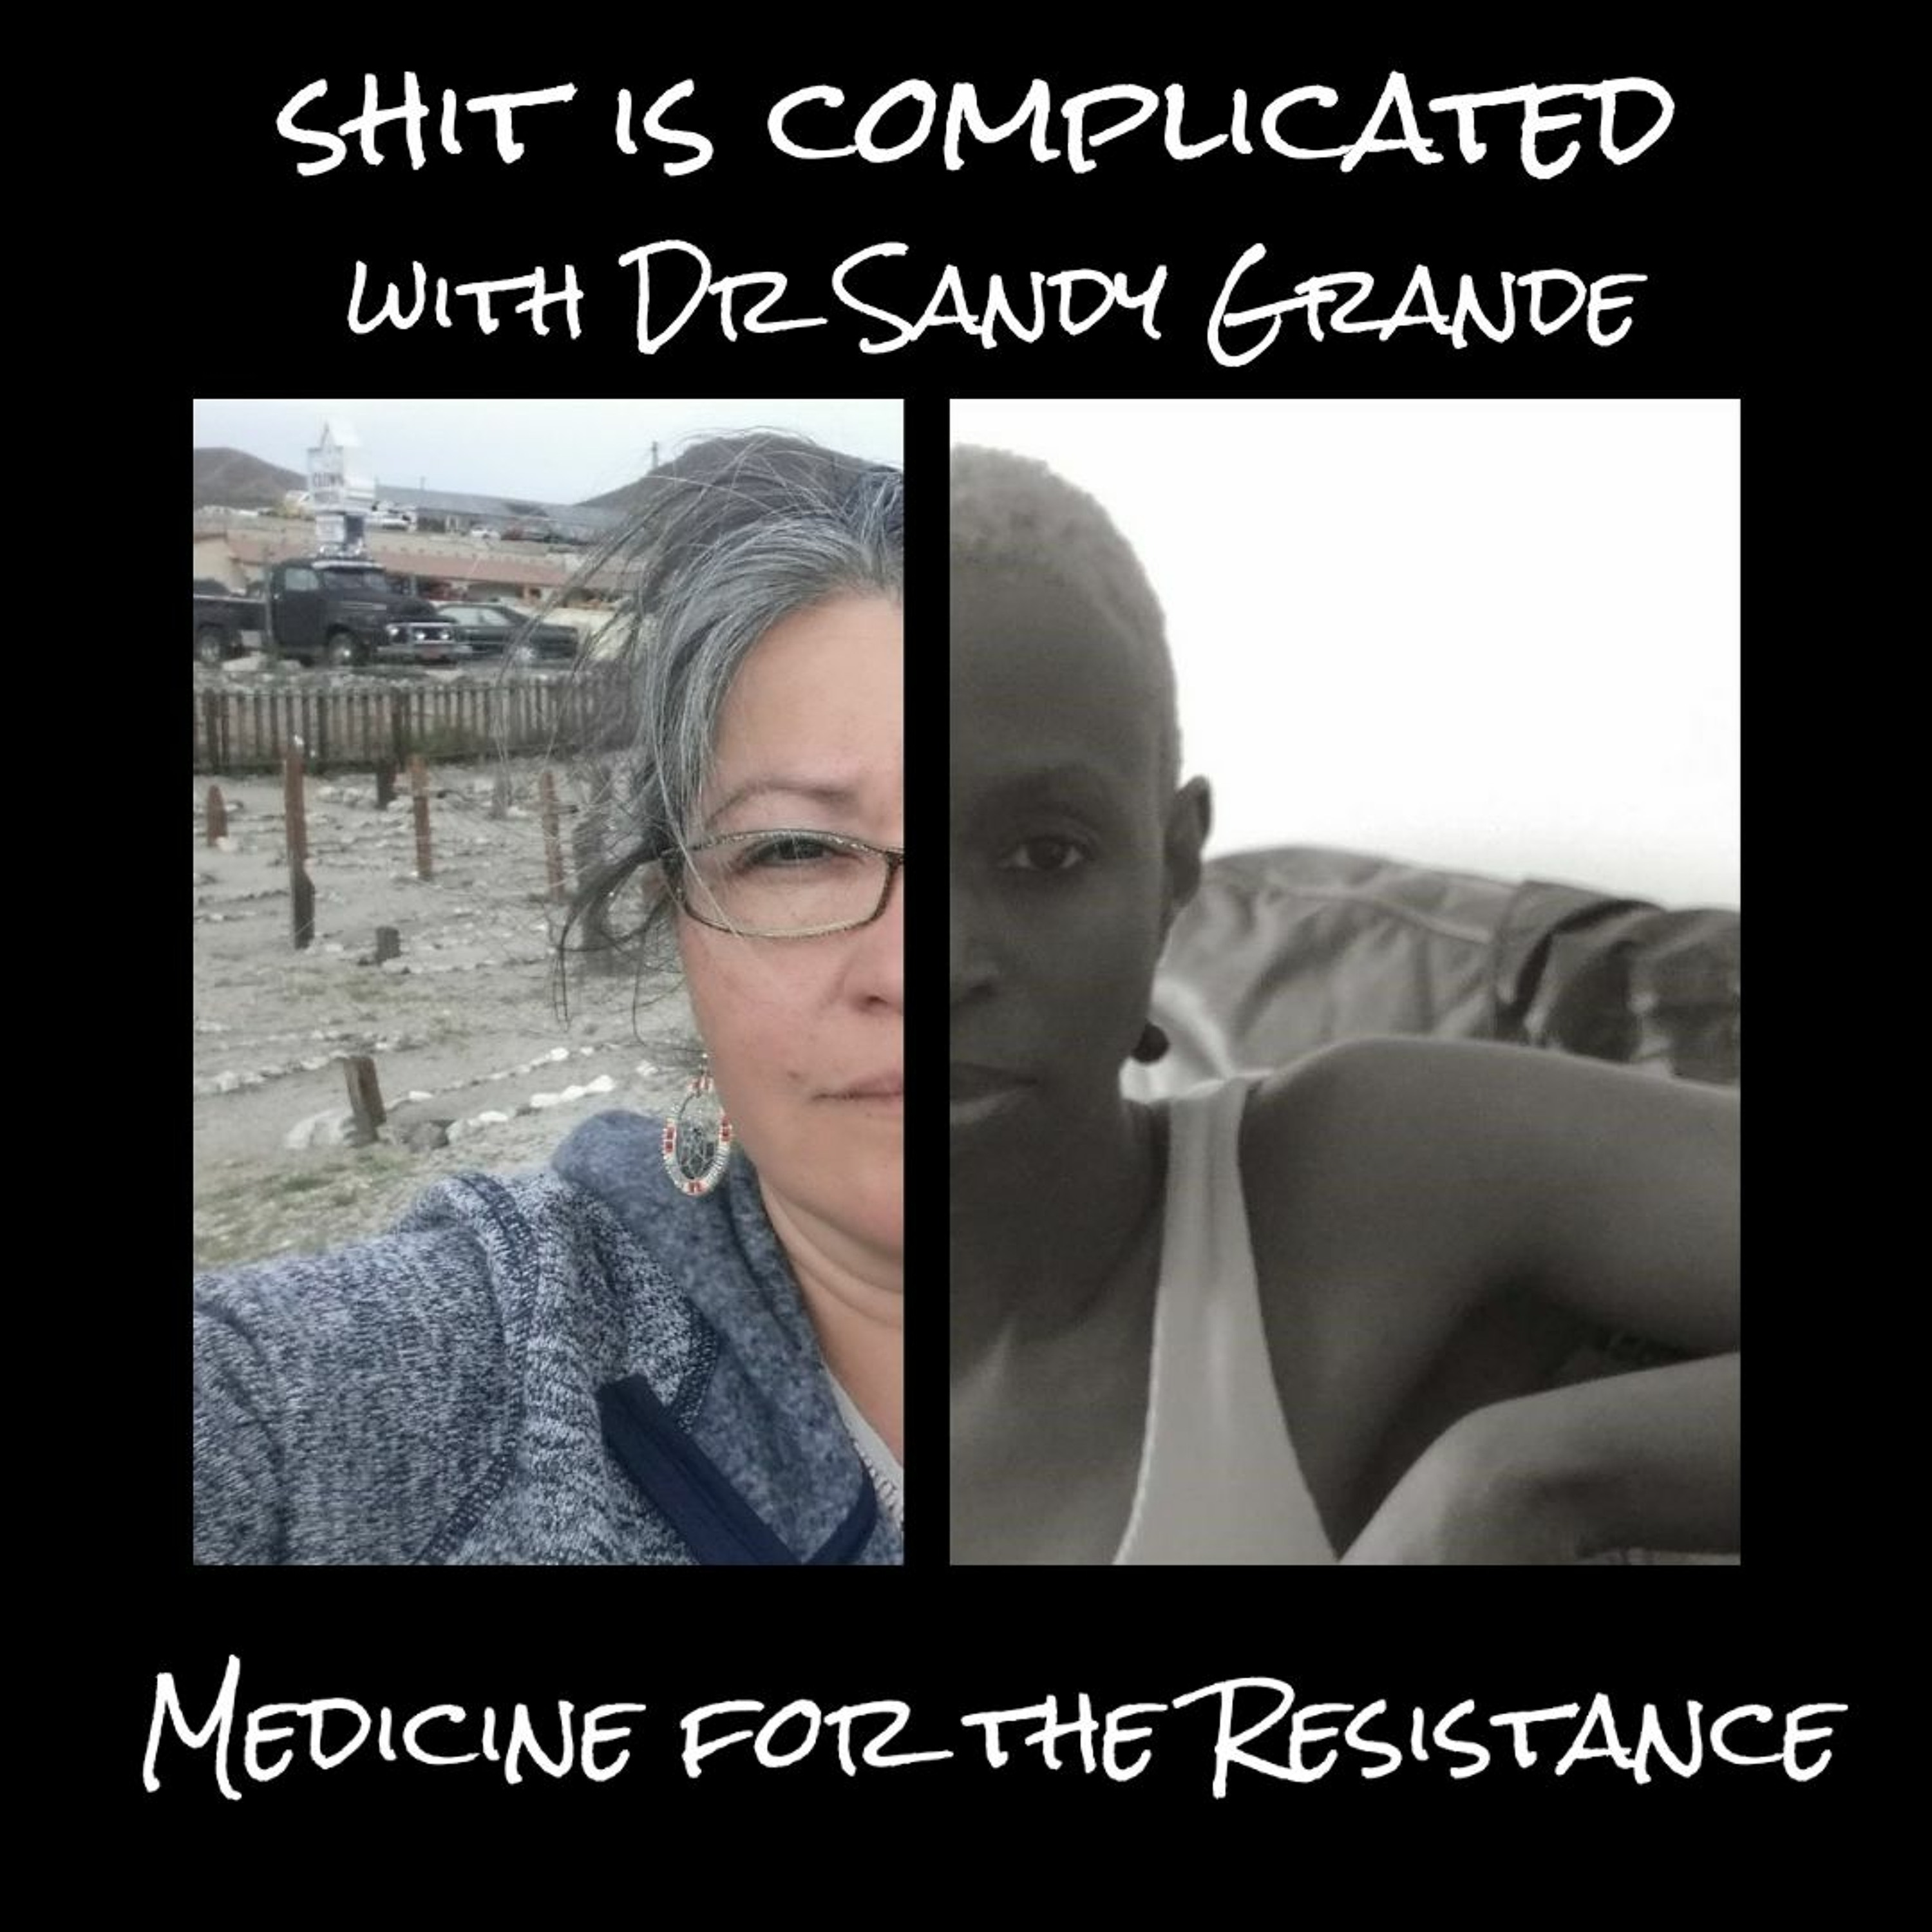 Ghosting the system with Dr Sandy Grande